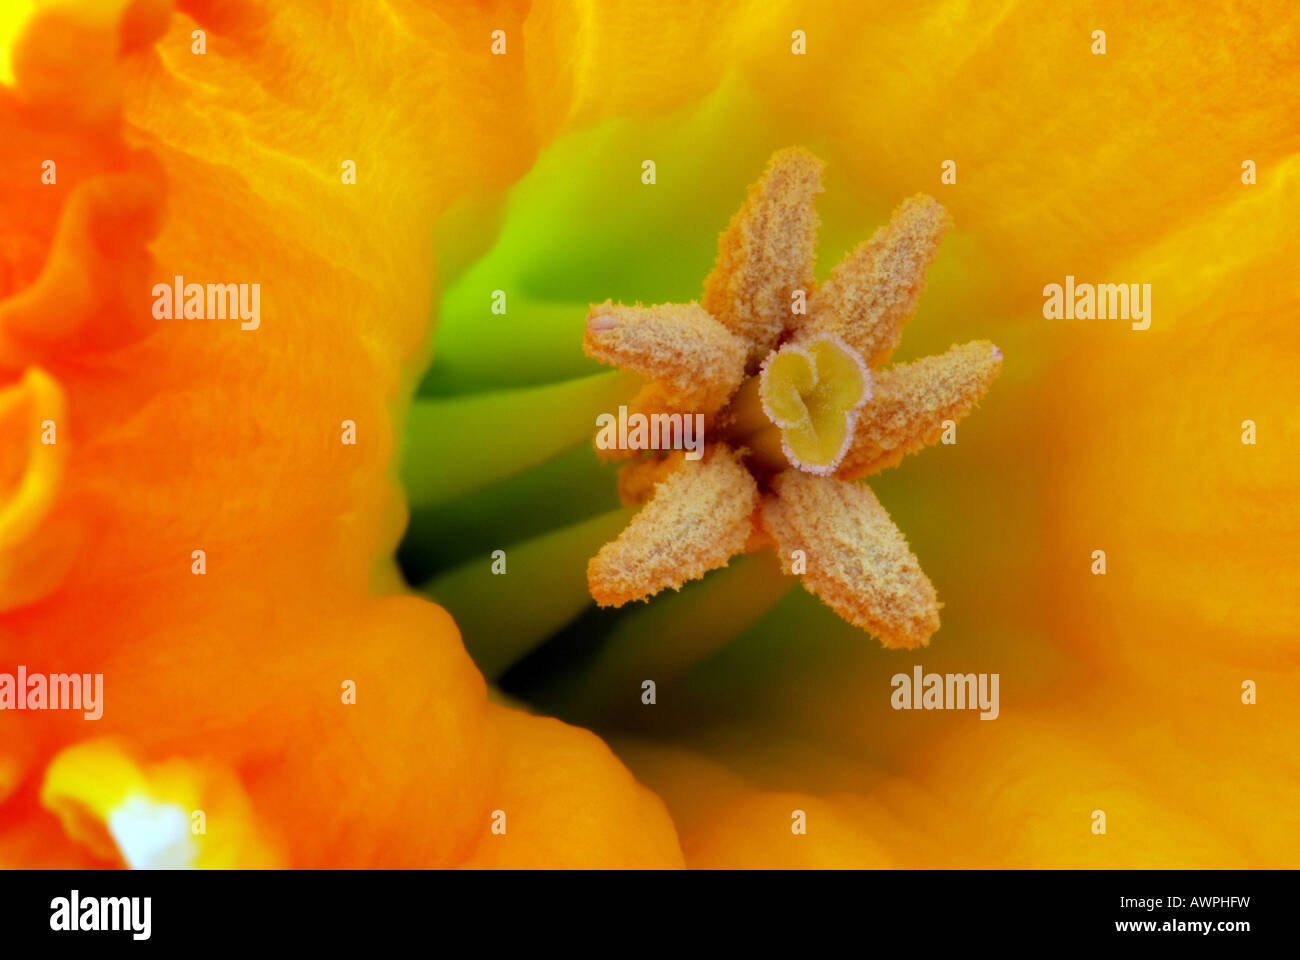 Close up shot of a daffodil trumpet showing anthers, stamens and filaments Stock Photo